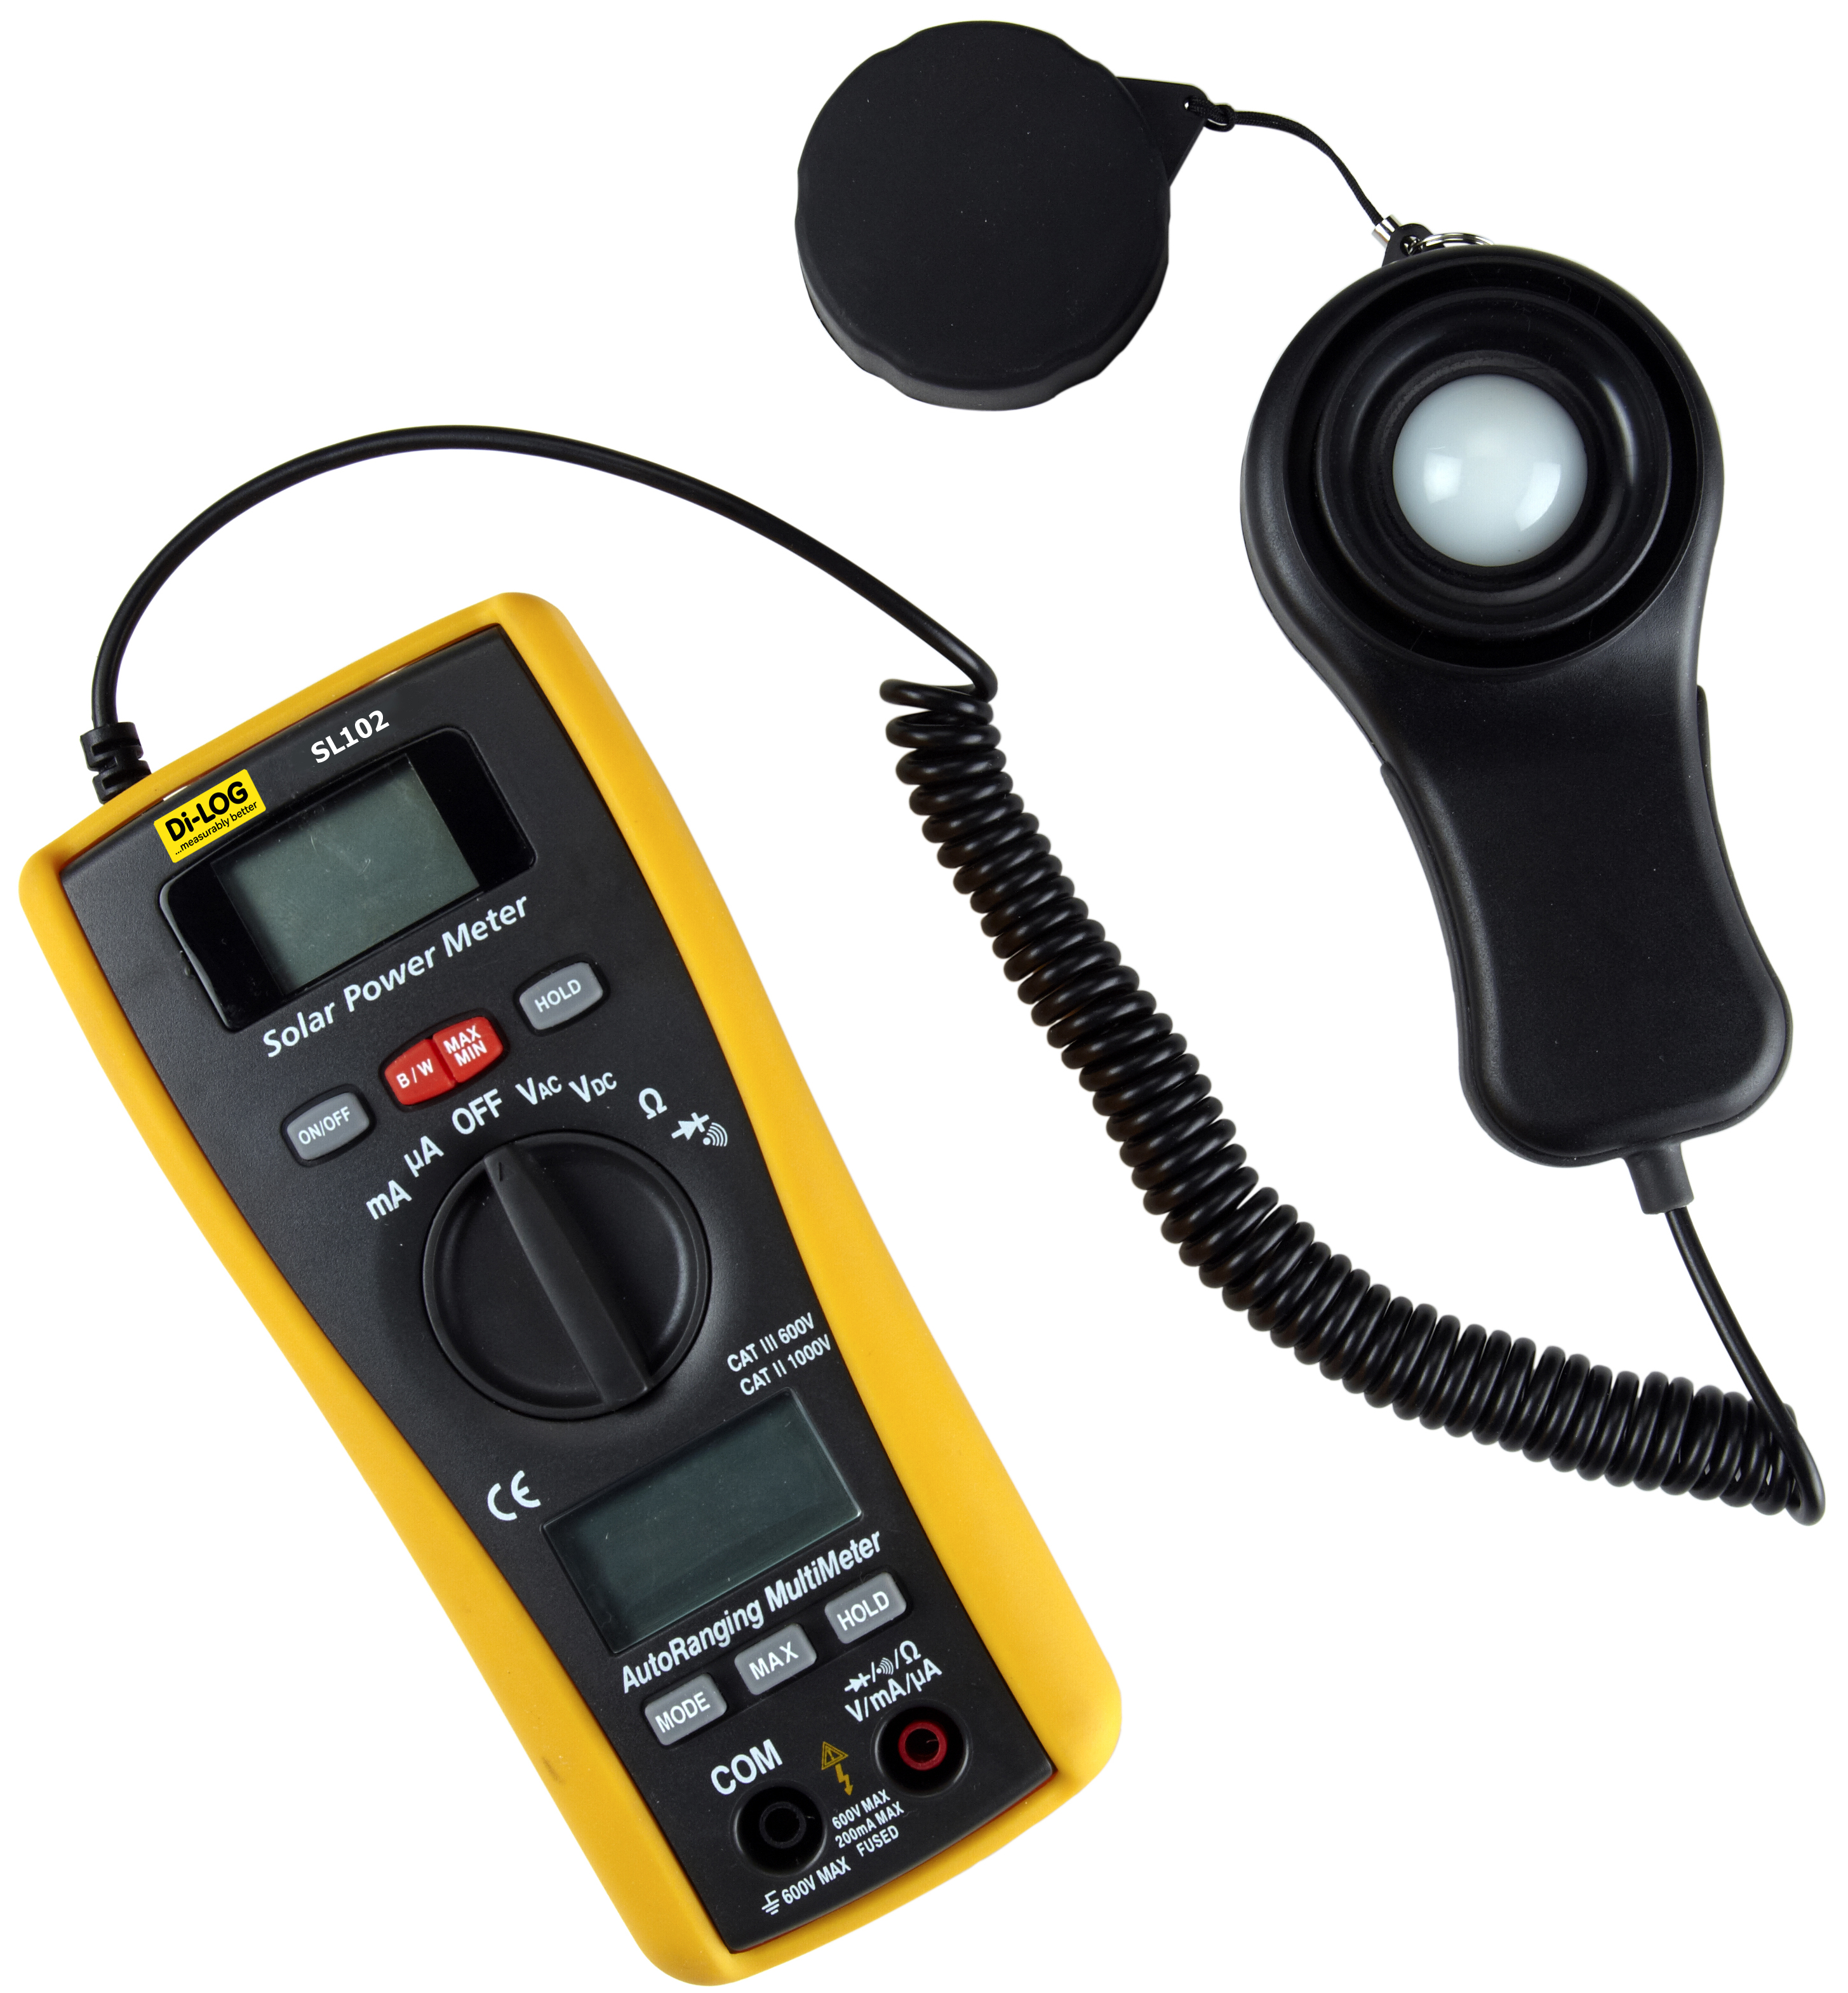 SL102 Advanced Irradiance Meter with built in DMM